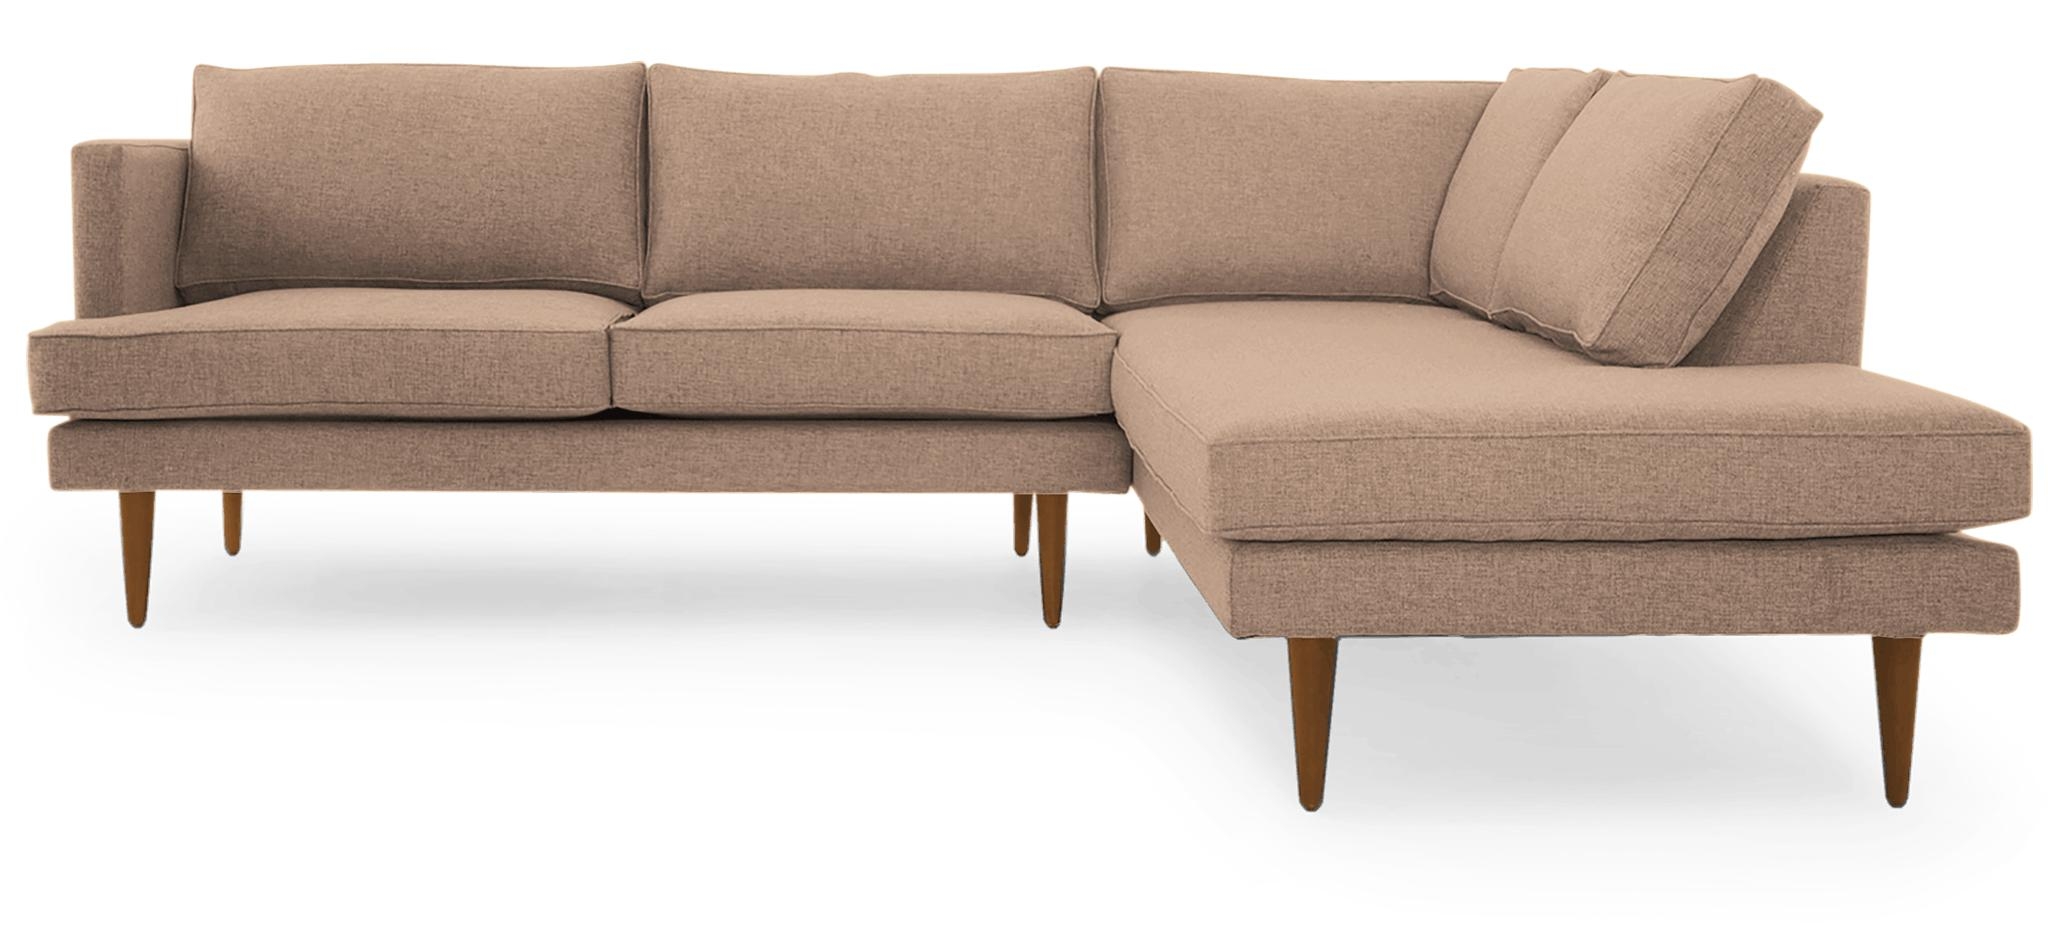 Pink Preston Mid Century Modern Sectional with Bumper (2 piece) - Royale Blush - Mocha - Left - Image 0